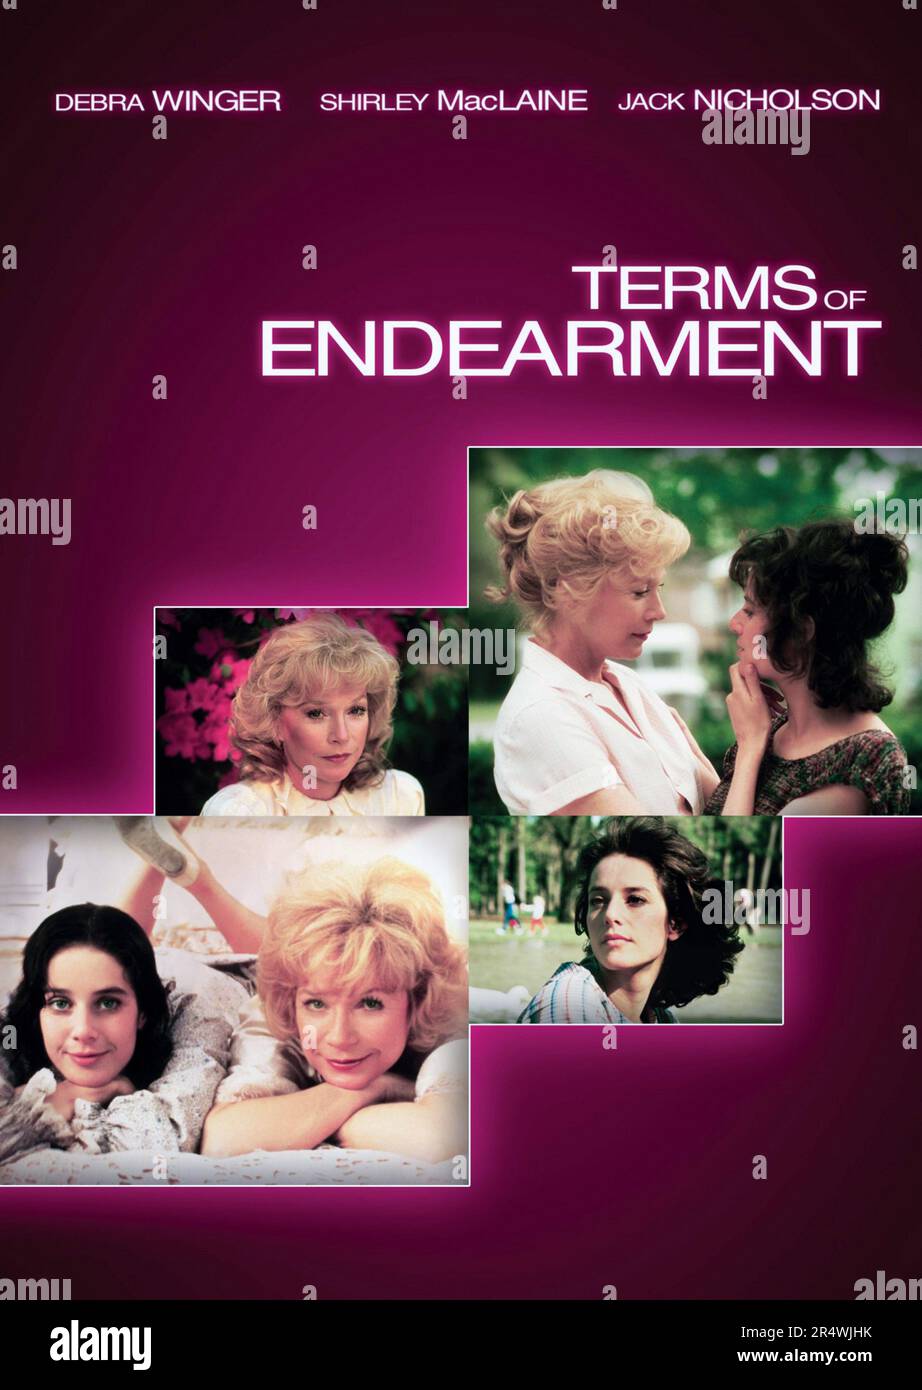 Terms of Endearment is a 1983 comedy-drama film that was adapted from the novel of the same name by Larry McMurtry. Directed by James L. Brooks and starring Shirley MacLaine, Debra Winger and Jack Nicholson. The story covers 30 years of the relationship between a mother and her daughter. Stock Photo